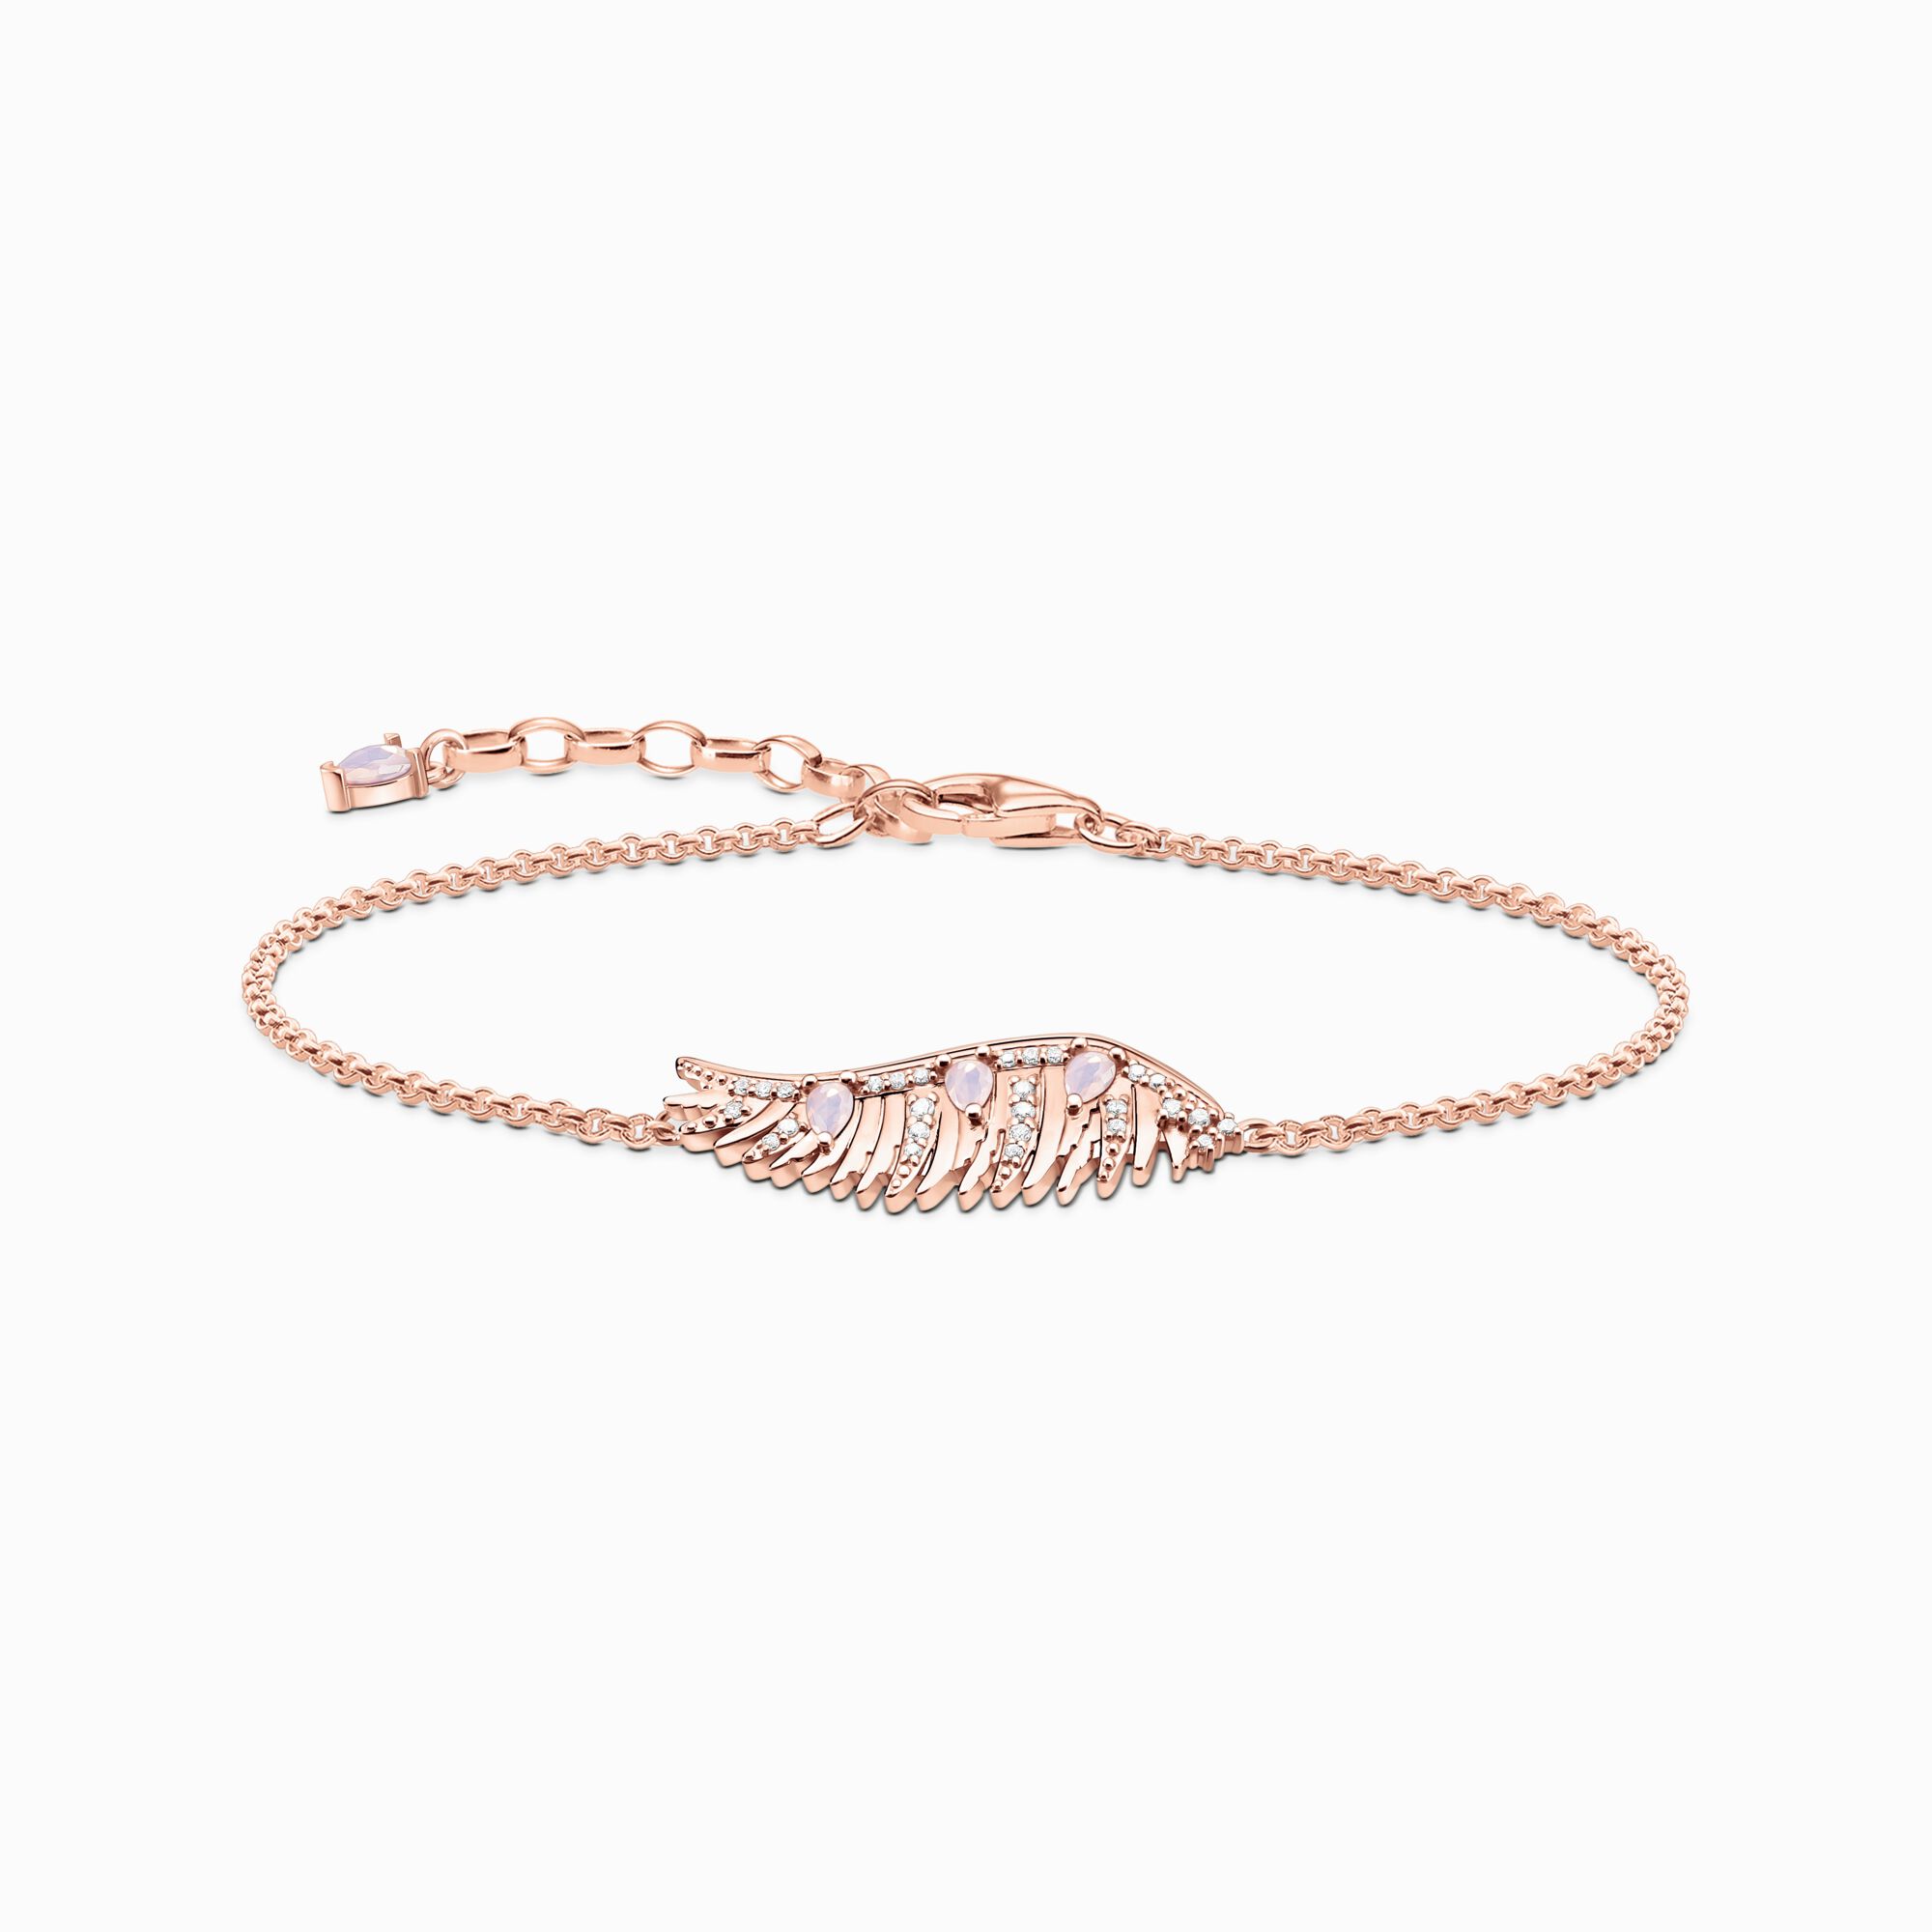 Bracelet phoenix wing with pink stones rose gold from the  collection in the THOMAS SABO online store